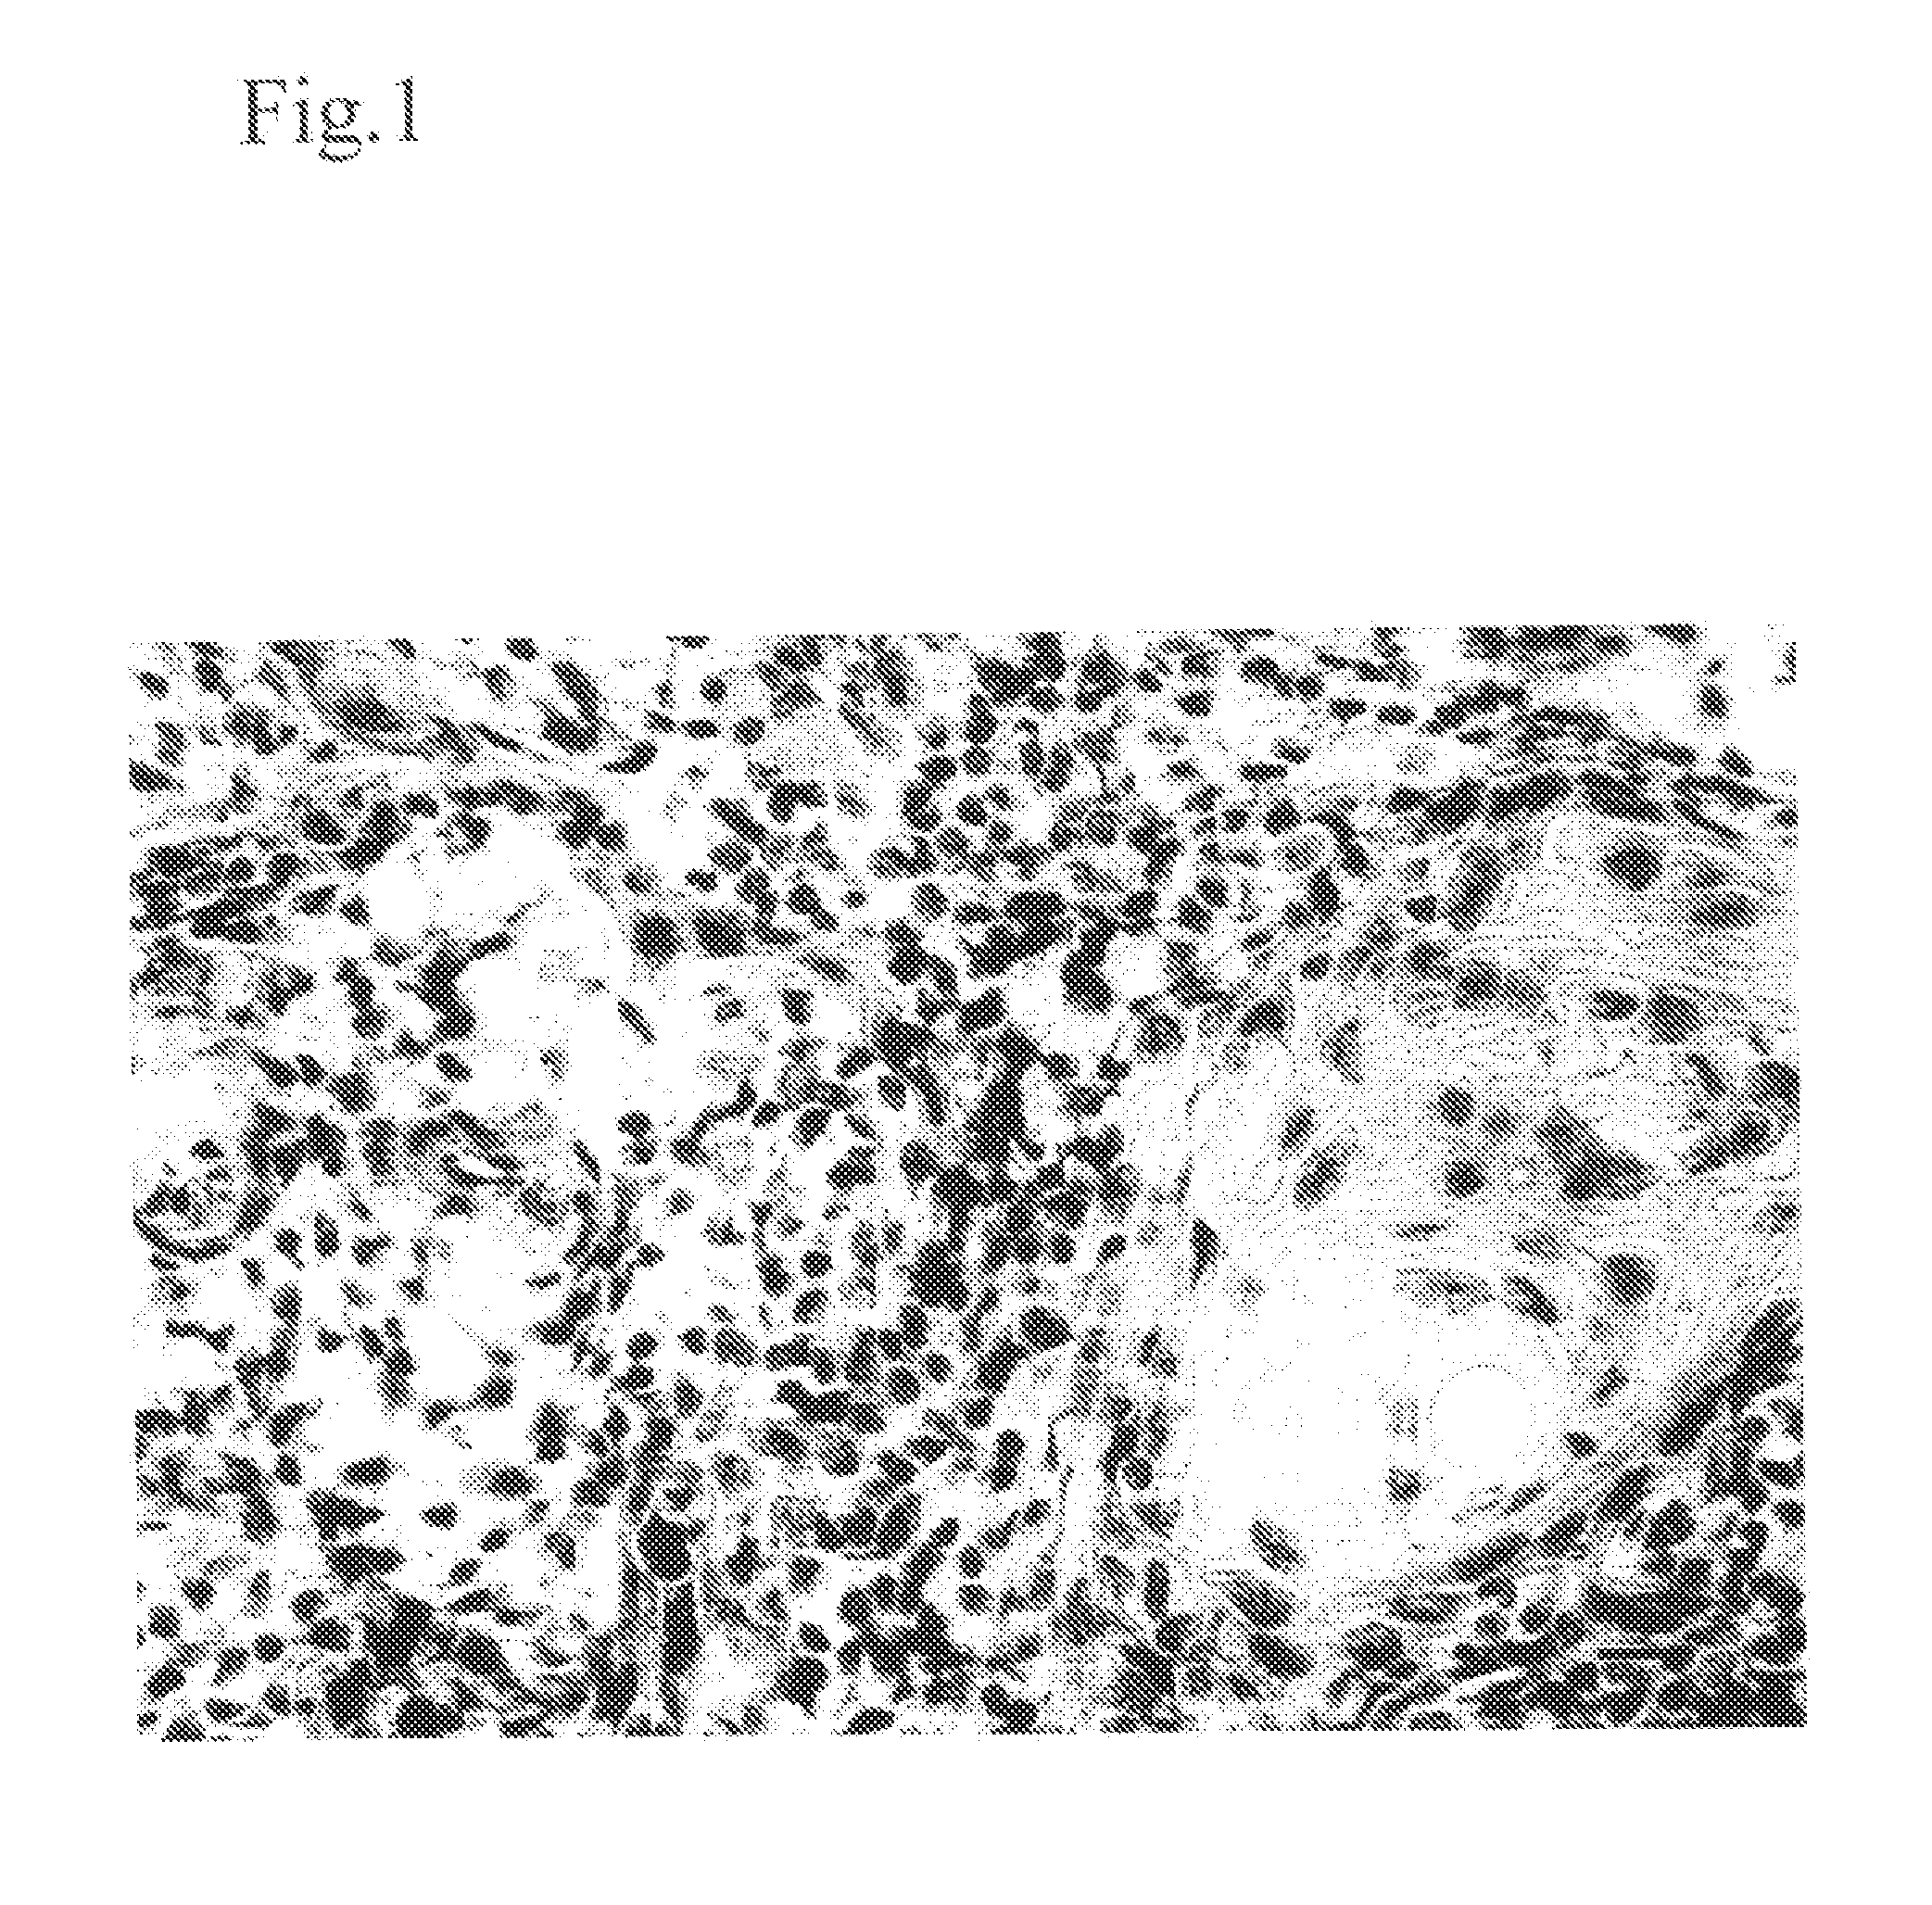 Method for modulating HLA class ii tumor cell surface expression with a cytokine mixture